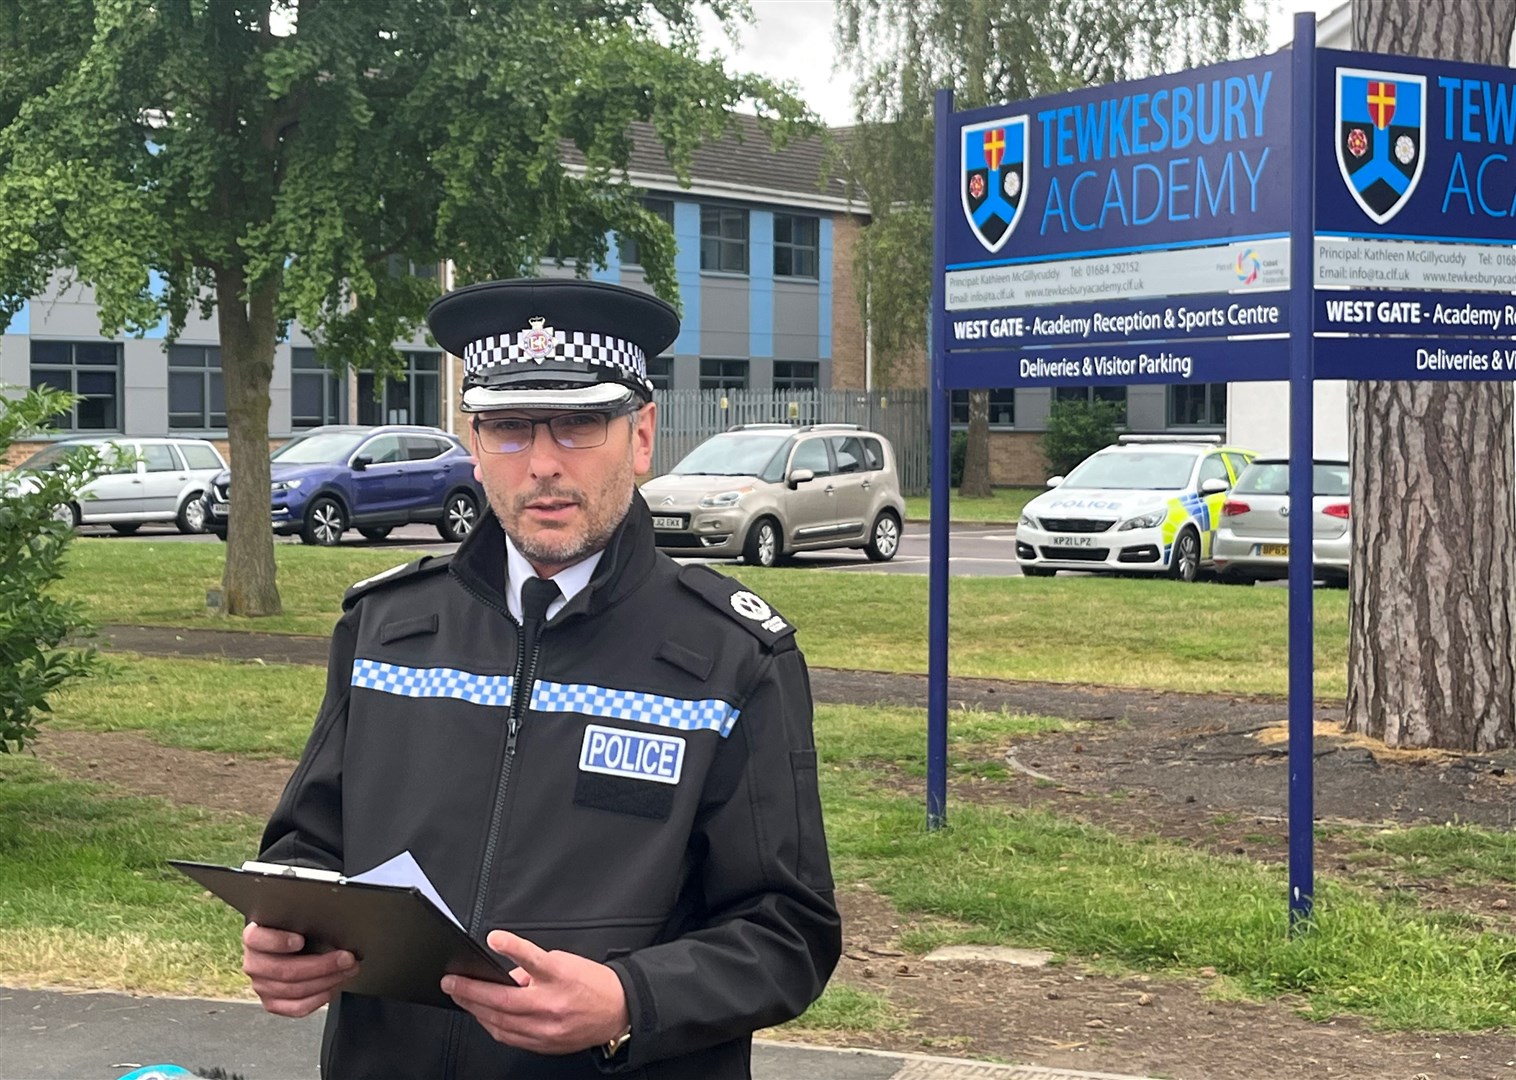 Assistant Chief Constable Richard Ocone, of Gloucestershire Police, reads a statement to reporters outside Tewkesbury Academy in Gloucestershire after the alleged attack (PA)